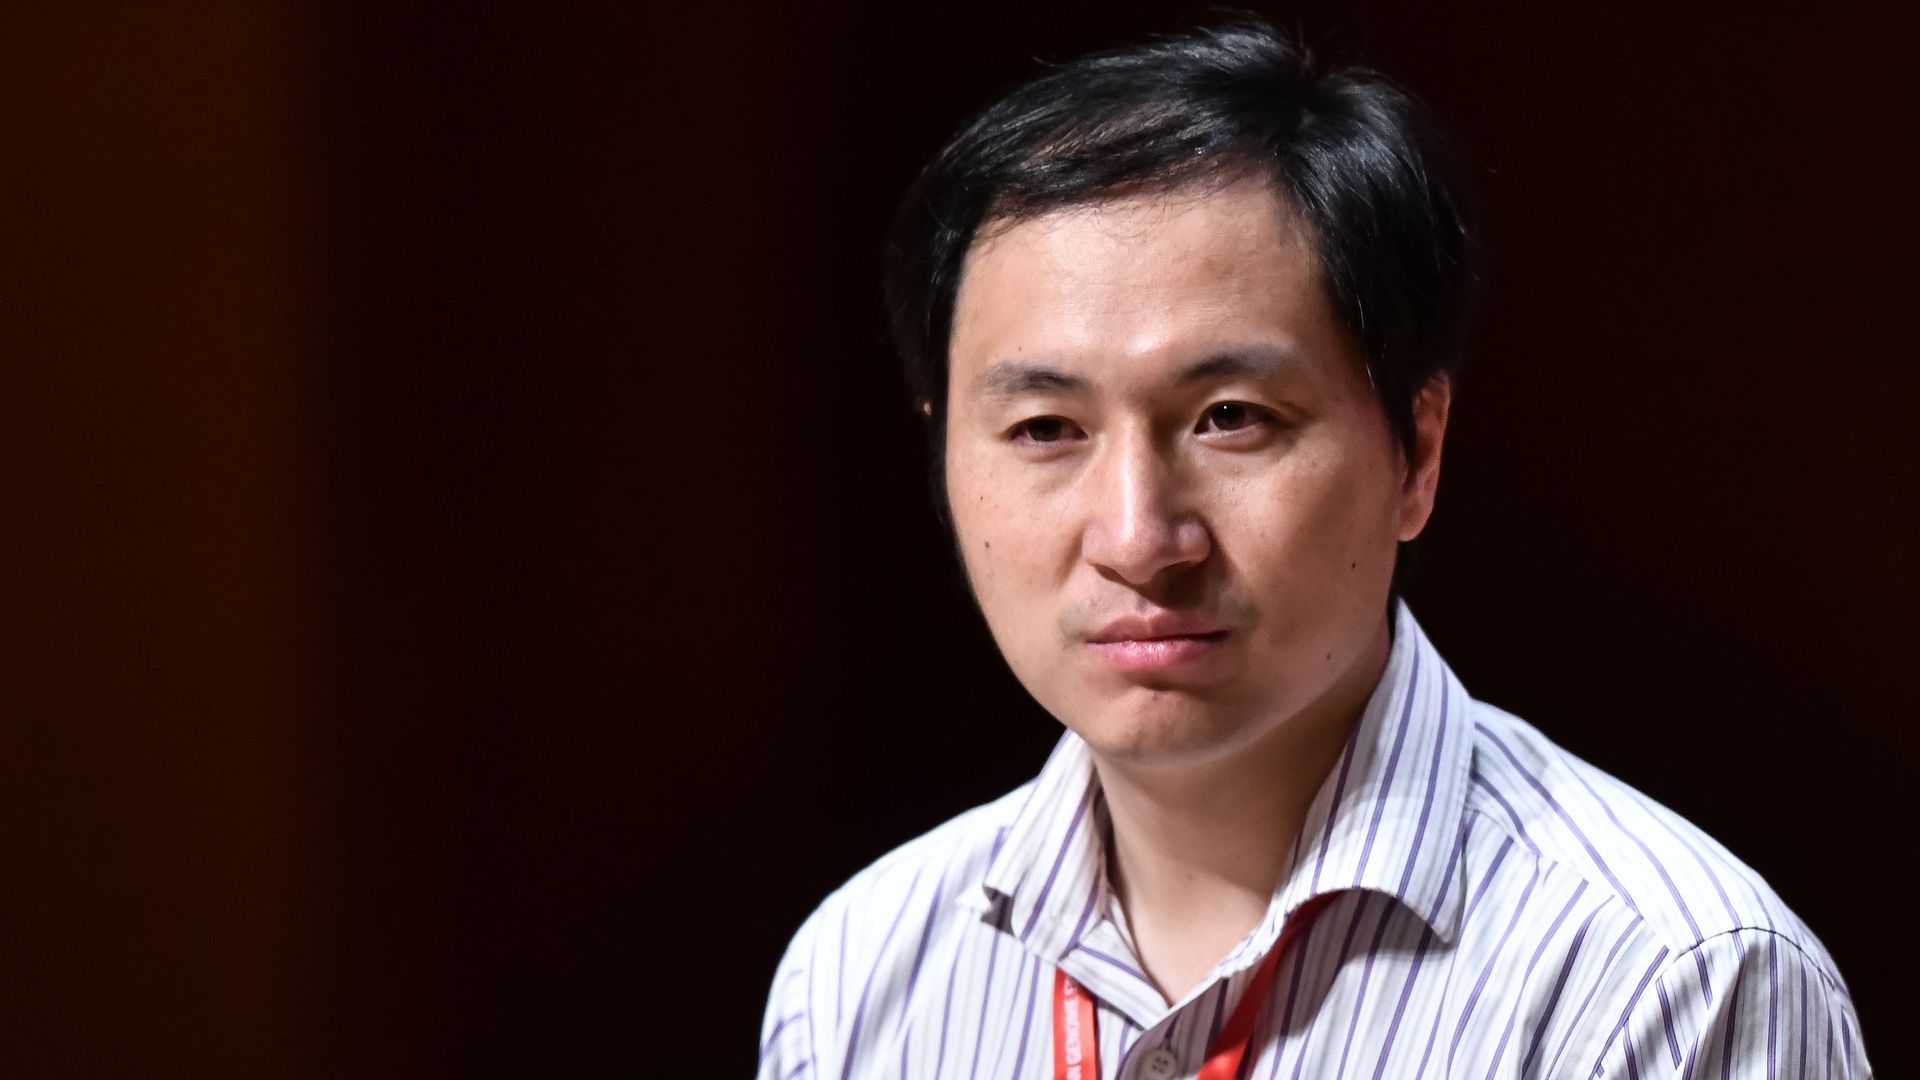 In this image, Chinese scientist He Jiankui sits and listens to someone speaking